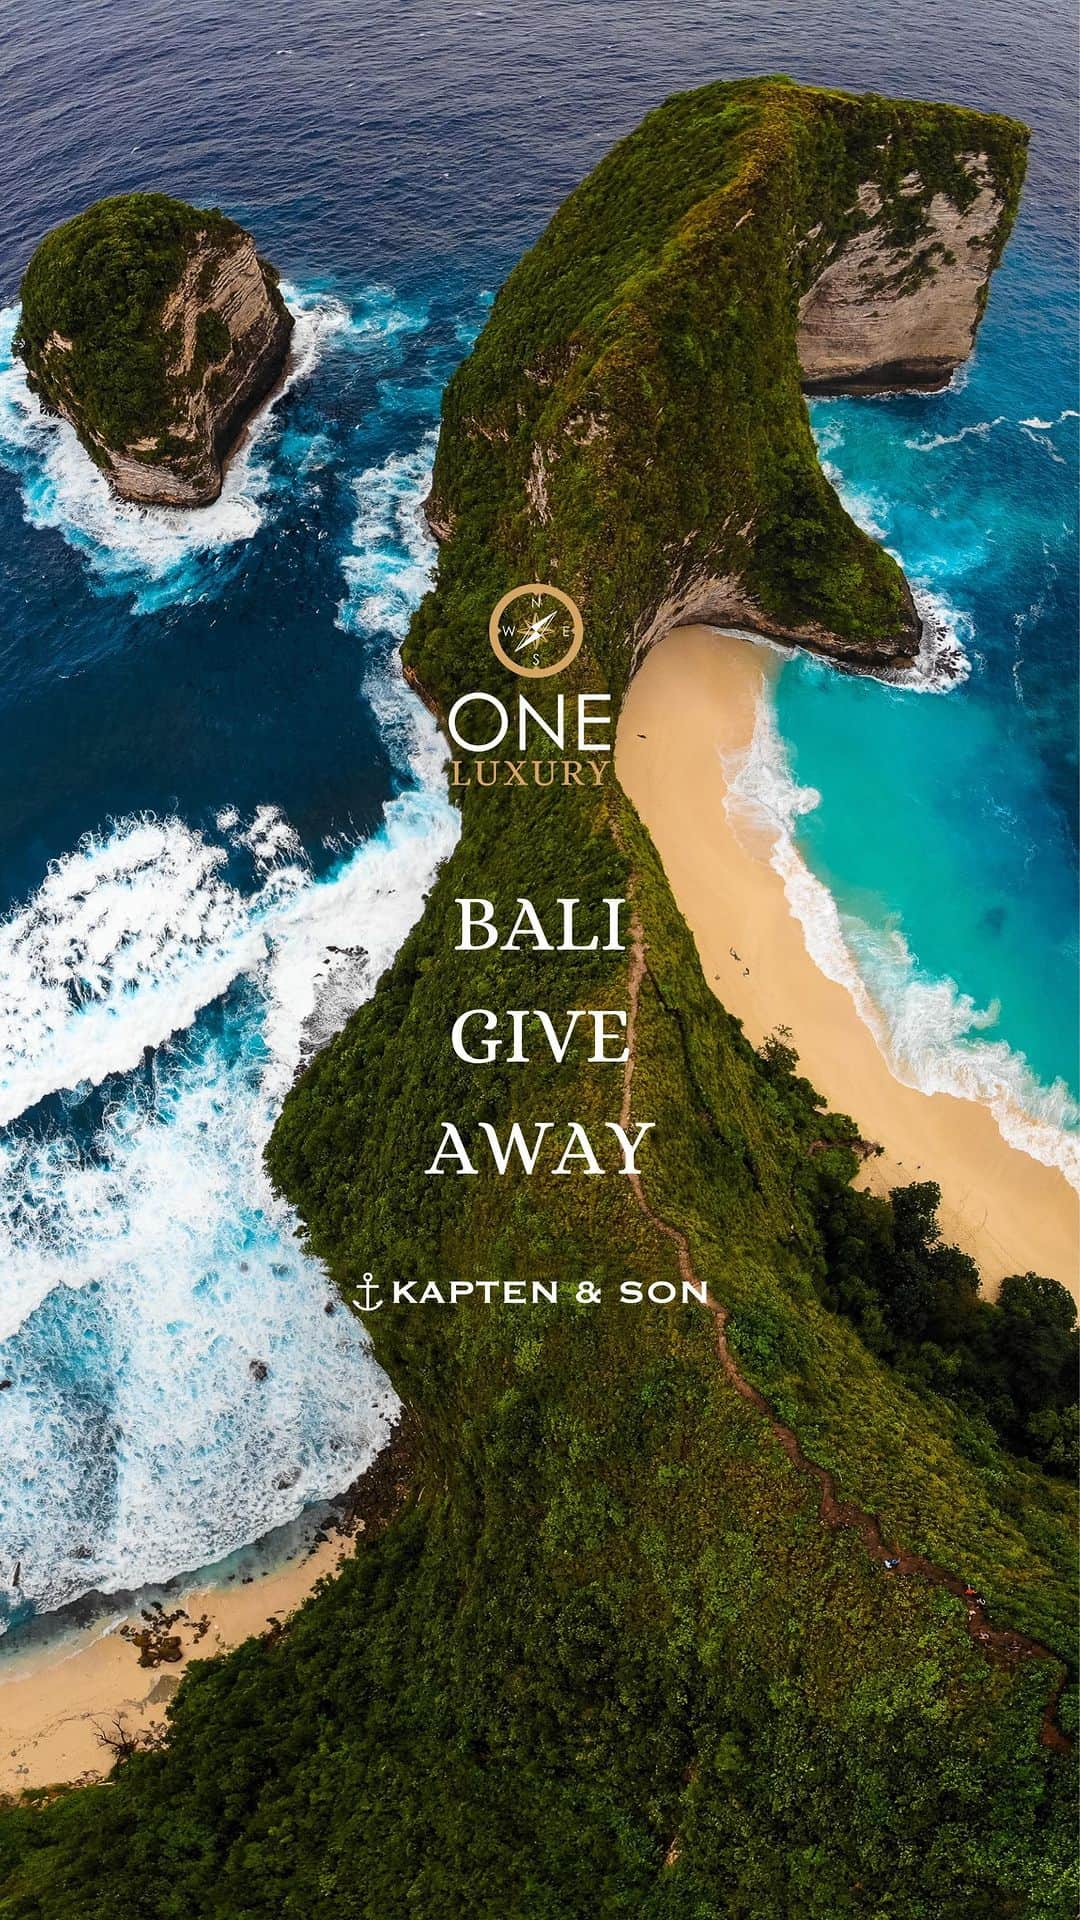 Kapten & Sonのインスタグラム：「WIN WIN WIN 🌴 oneluxury.de x Kapten & Son Attention Bali lovers! 🤍 We live for beautiful experiences, so ONE of you has the chance to WIN a trip for you and your travel buddy to a Luxury Resort in BALI (including a 4 night stay, breakfast and international flights) by @oneluxury.de and two big travel sets by @kaptenandson - for your perfect trip ✈️  How to win: 🤍 Follow @kaptenandson @oneluxury.de 🤍 Like our Reel 🤍Tag your travel buddy (you can take part as often as you like! 😎)  optional: Share our Reel in your Story!   Fingers crossed for you! 🤞The giveaway ends on 31.12.2023 23:59:59. Find our terms and conditions: https://kaptenandson.zendesk.com/hc/en-gb/articles/360010604159-Terms-and-conditions-Kapten-Son-raffles%E2%81%A3%E2%81%A3  #oneluxury #bekapten #betheexperience #giveaway」